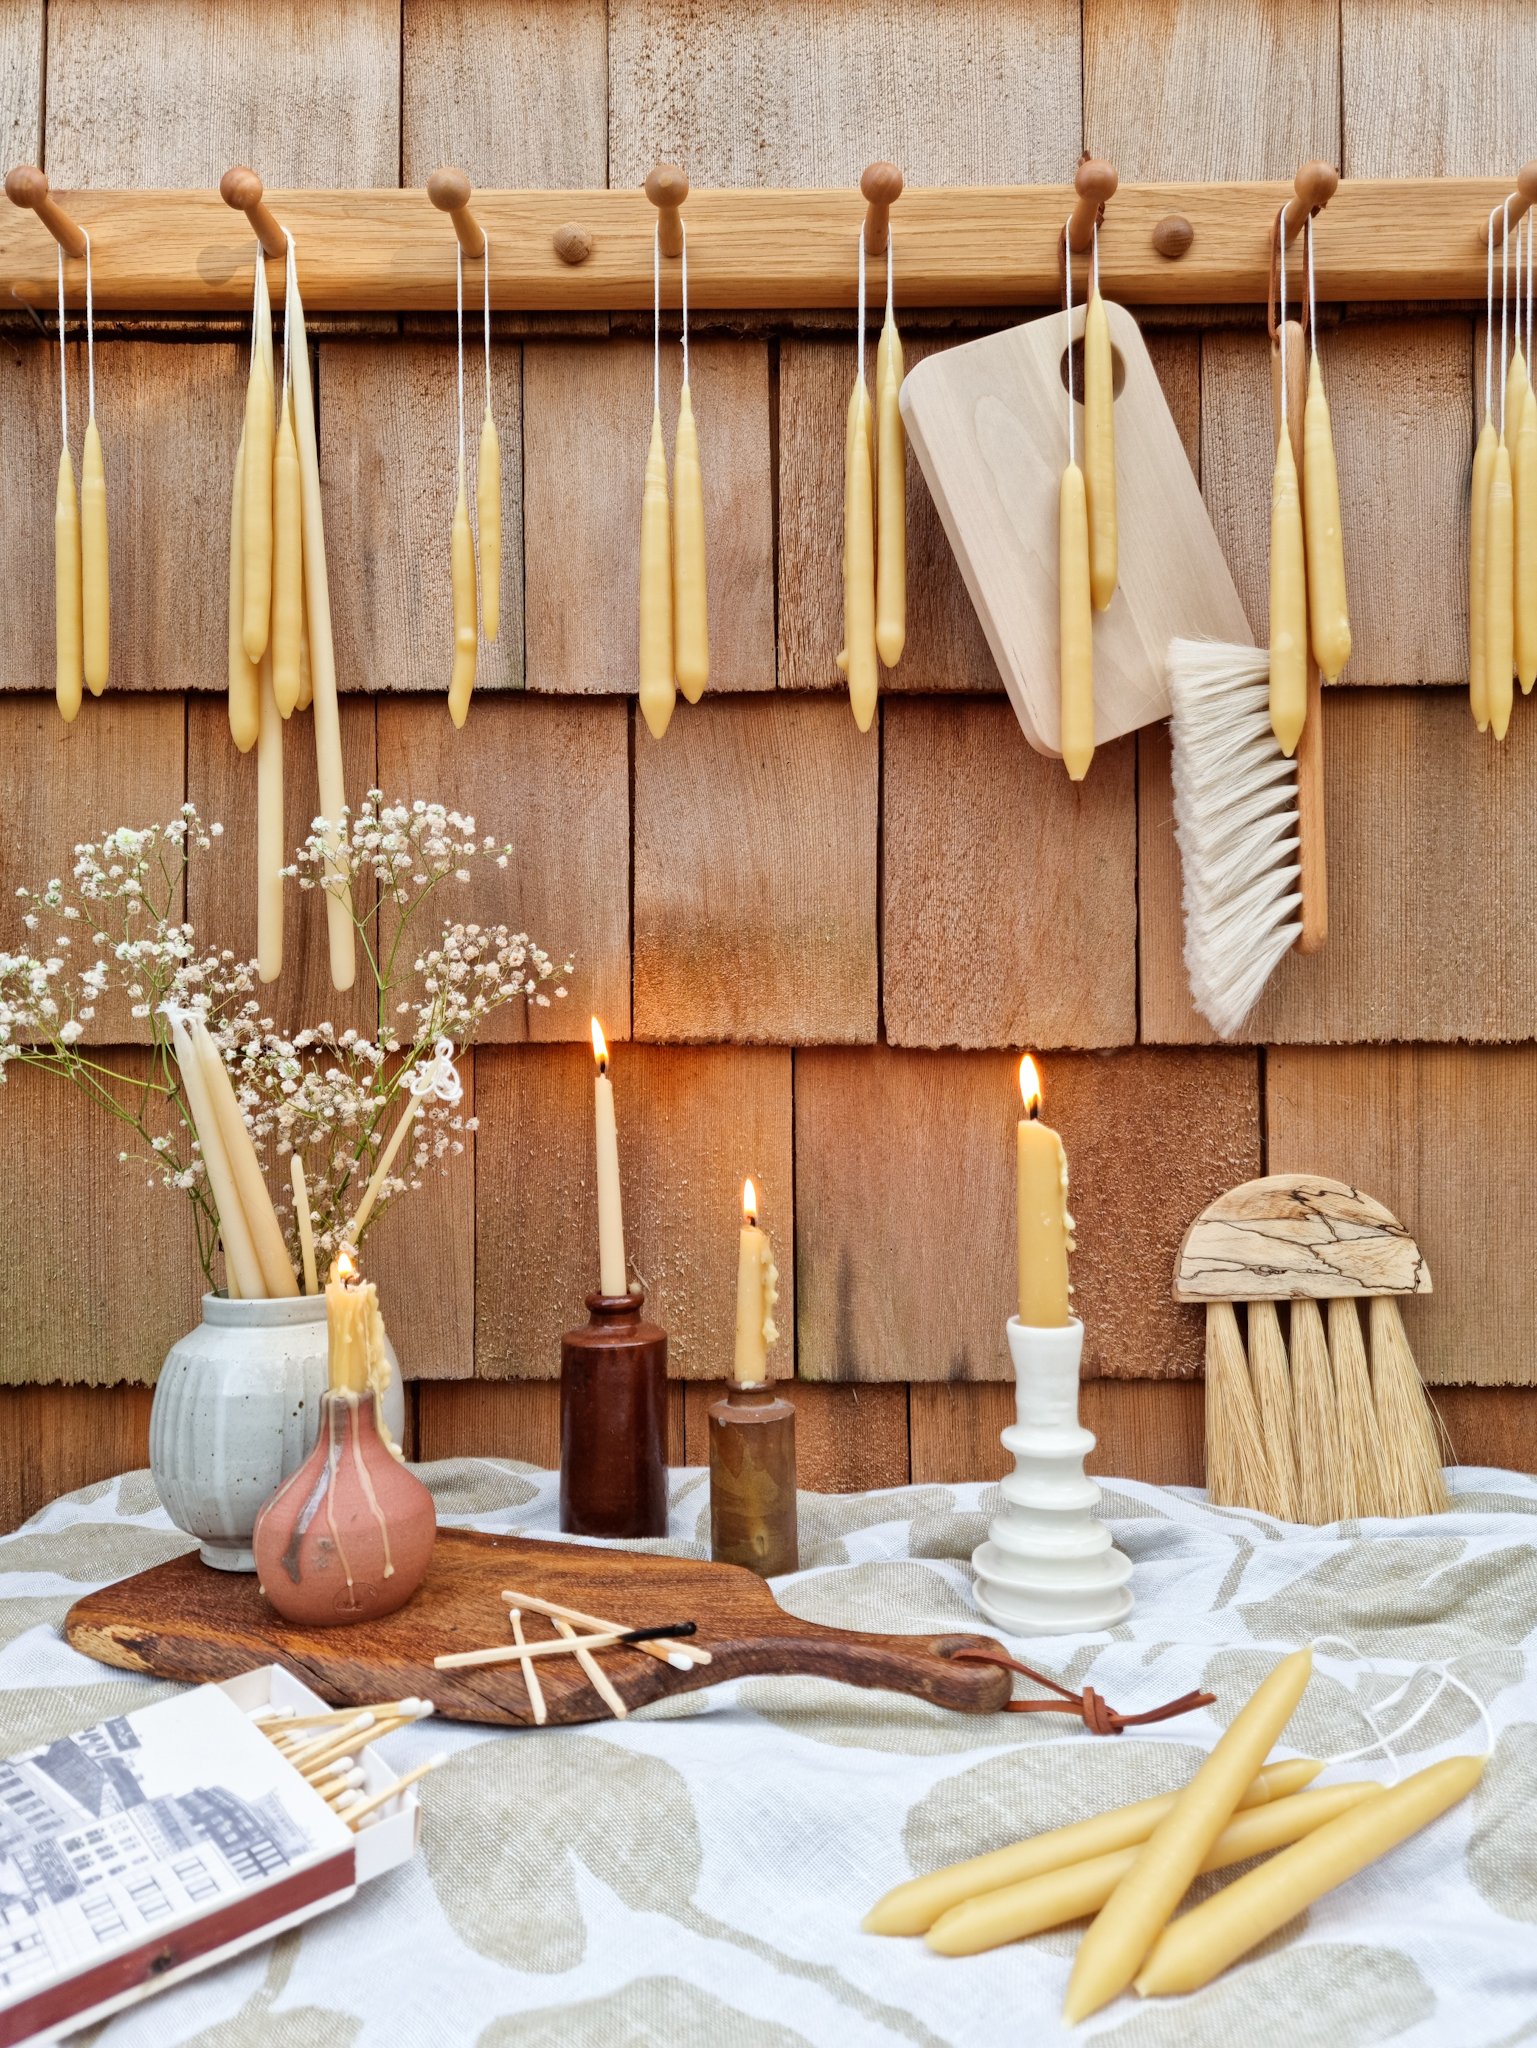 Homemade Reused Beeswax Candles. — Alice in Scandiland